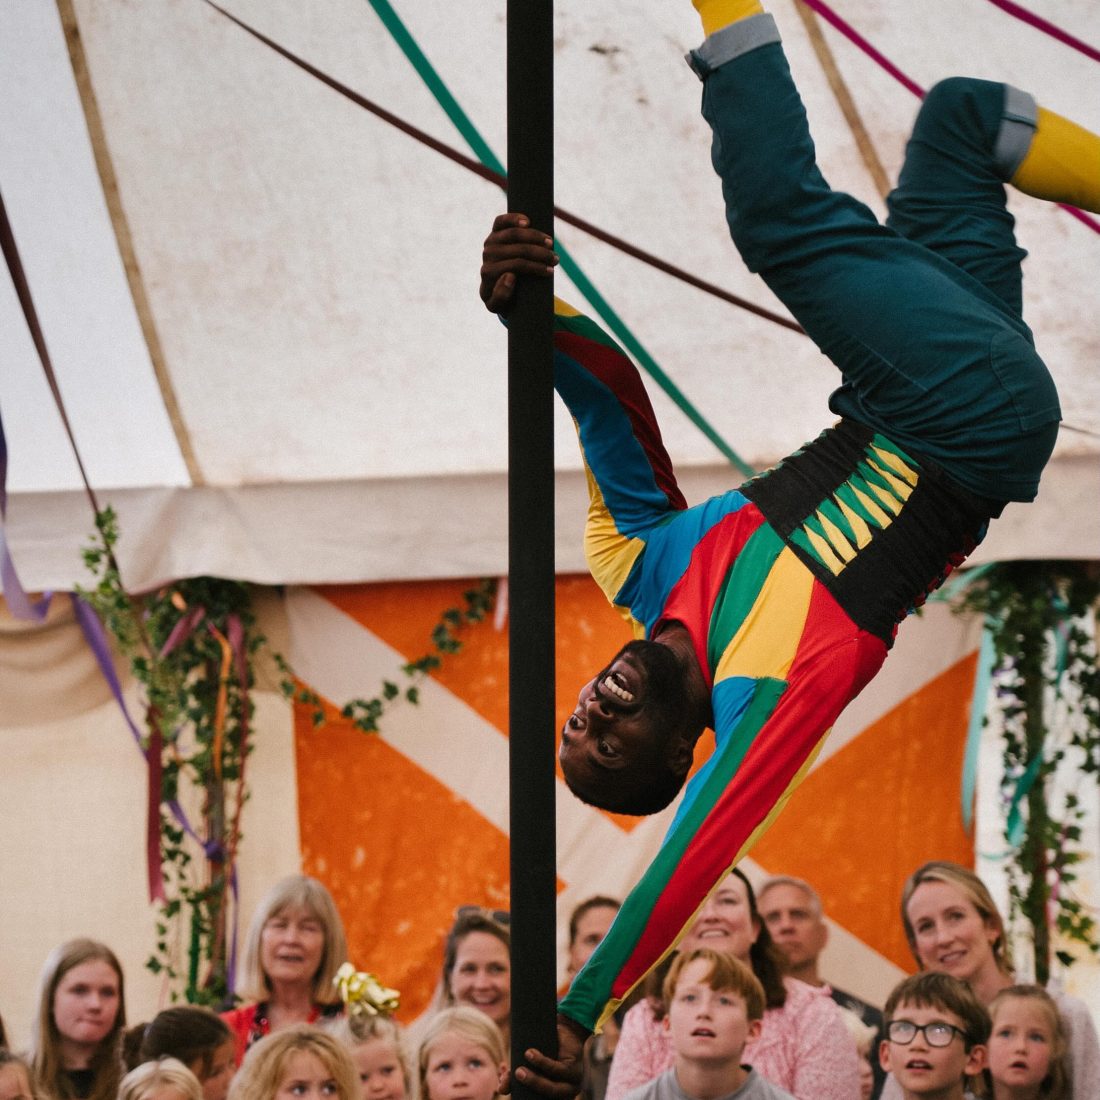 Fools Delight – the young pretender to Gifford Circus’ crown?